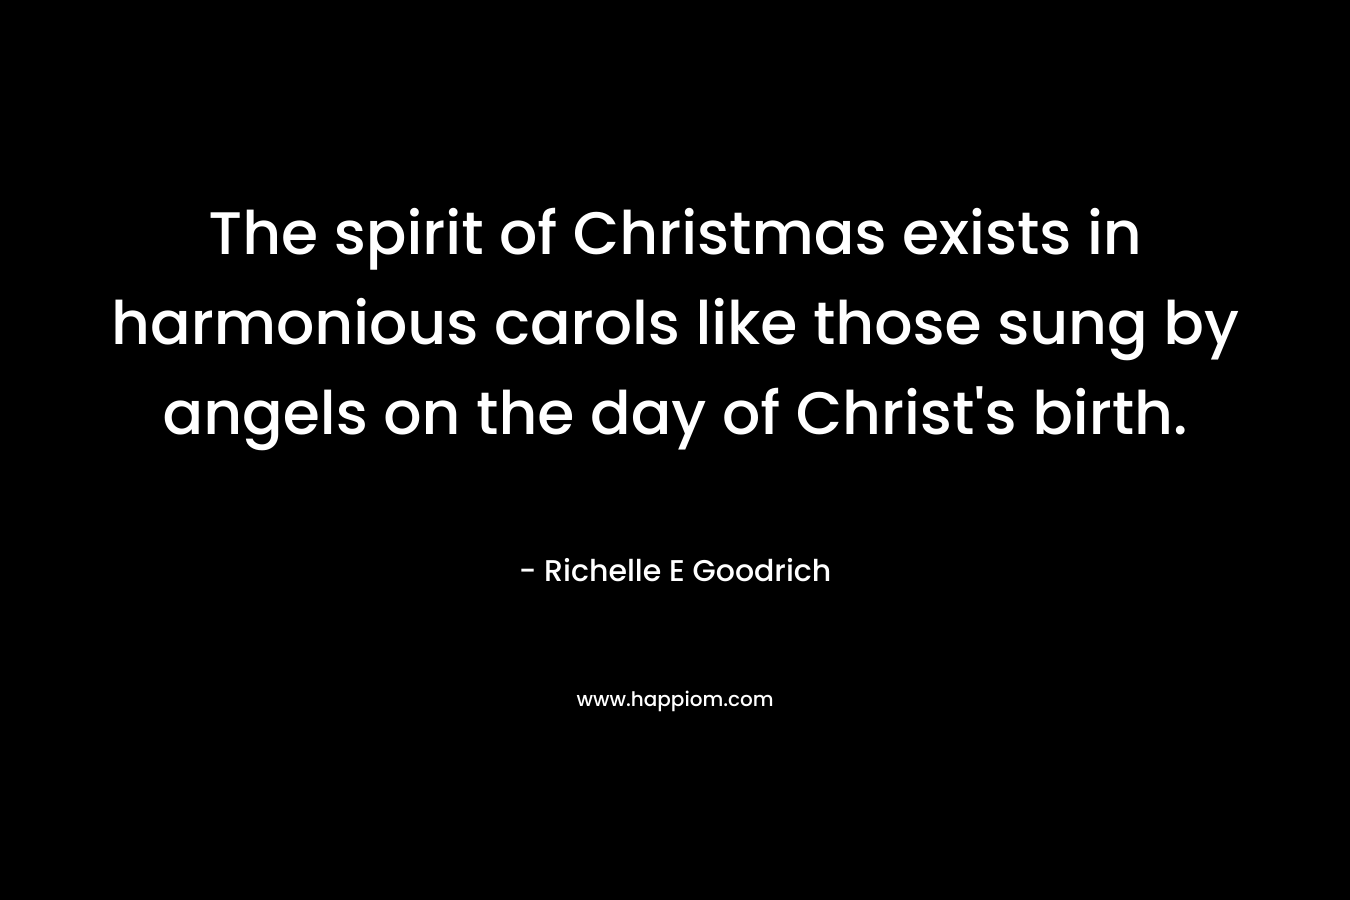 The spirit of Christmas exists in harmonious carols like those sung by angels on the day of Christ's birth.